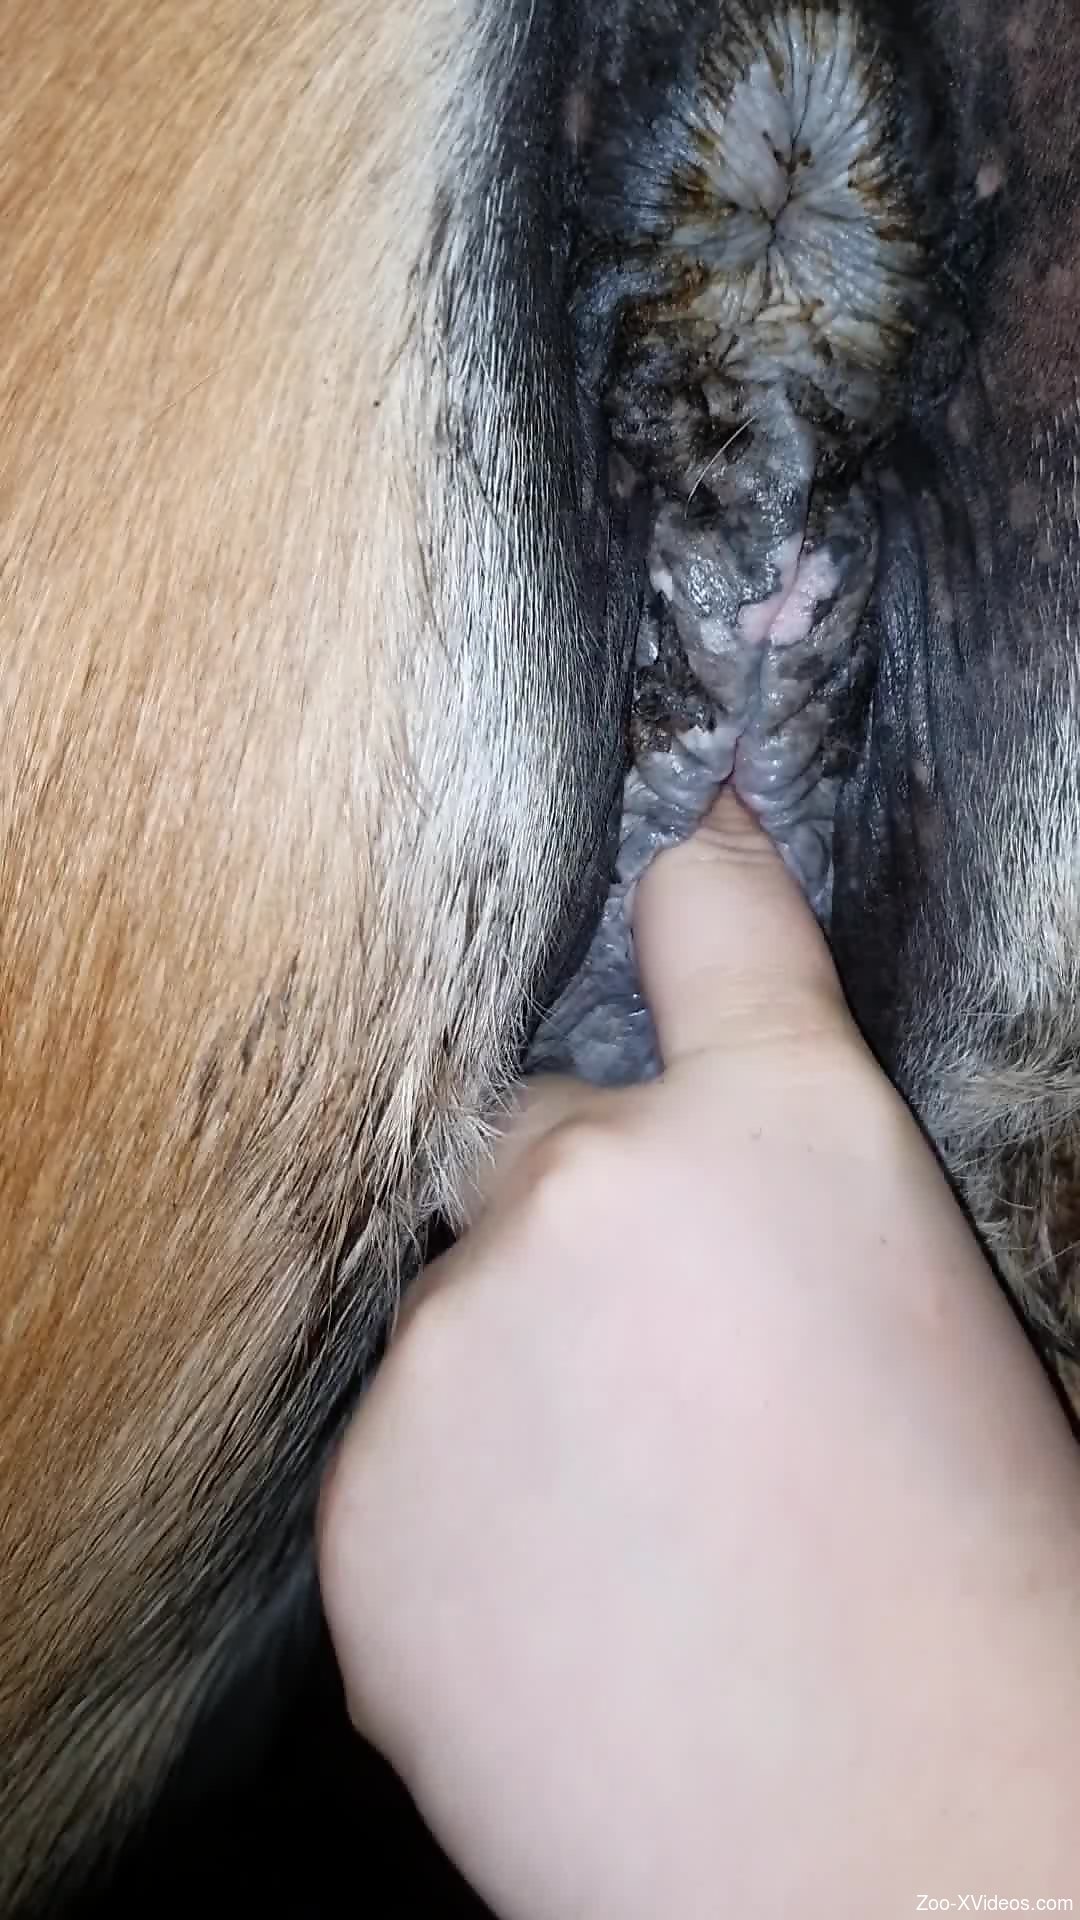 Female Horse Pussy - Aroused female sticks the fingers into the horse's vagina